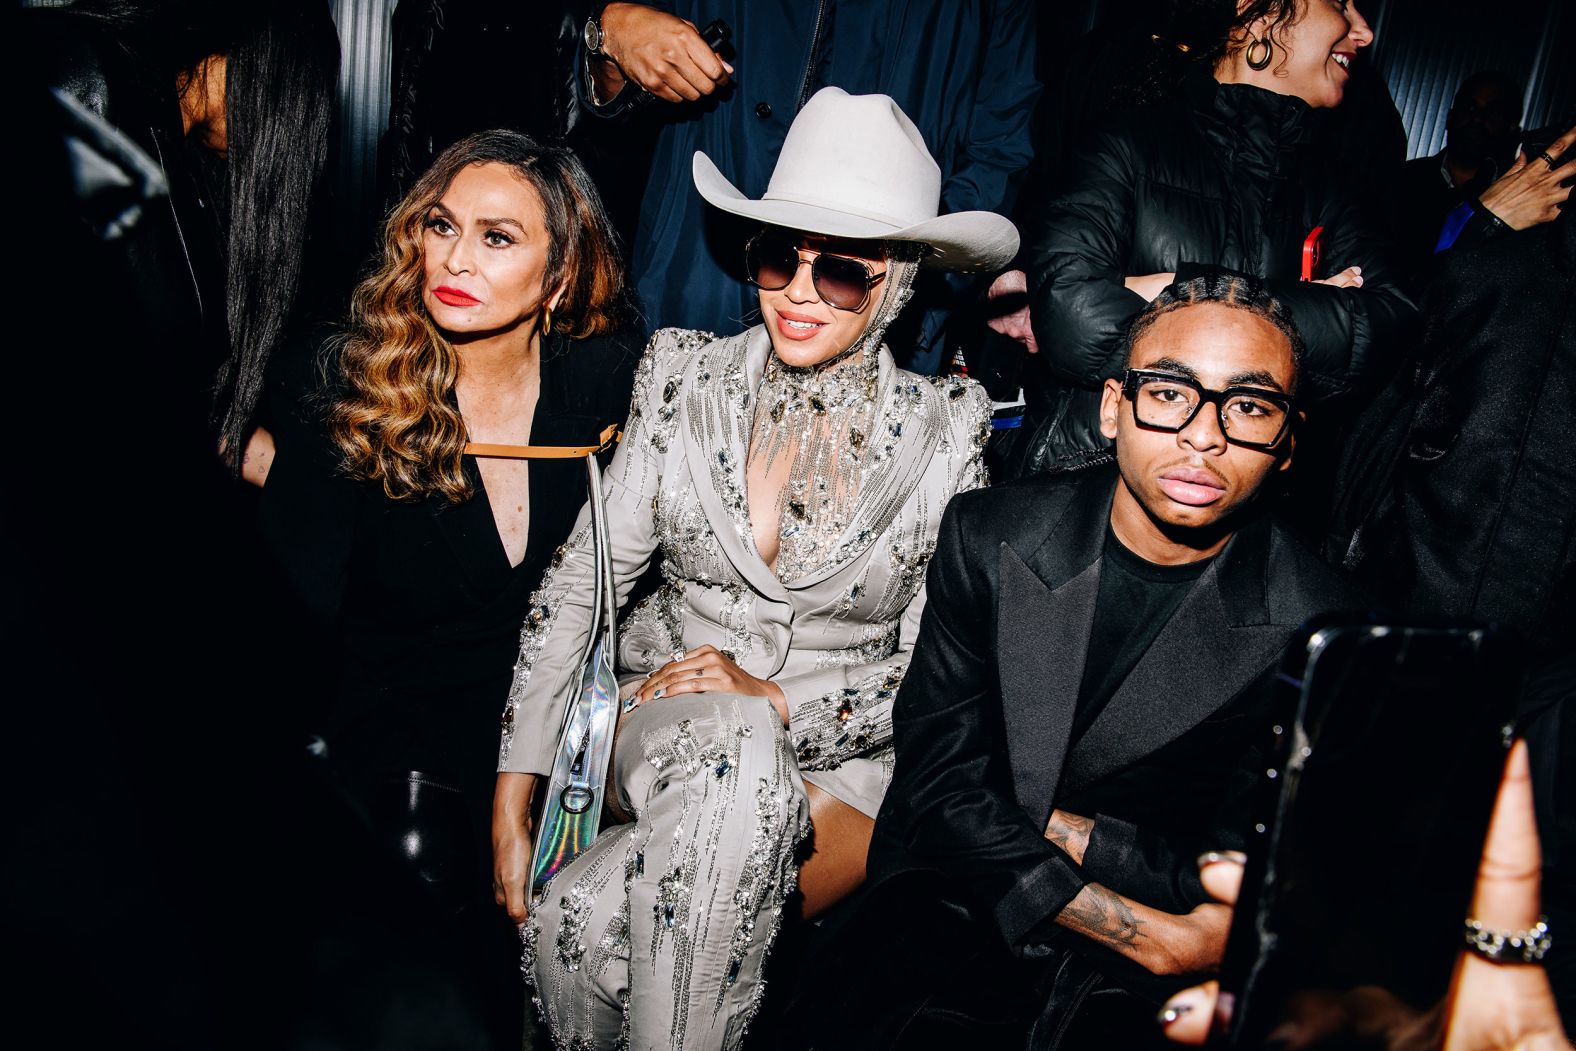 Singer Beyoncé, center, makes a <a href="index.php?page=&url=https%3A%2F%2Fwww.cnn.com%2F2024%2F02%2F13%2Fstyle%2Fnyfw-fall-2024-celebrity-fashion%2Findex.html" target="_blank">surprise appearance at a Luar fashion show</a> in New York with her mother, Tina Knowles, on Tuesday, February 13.